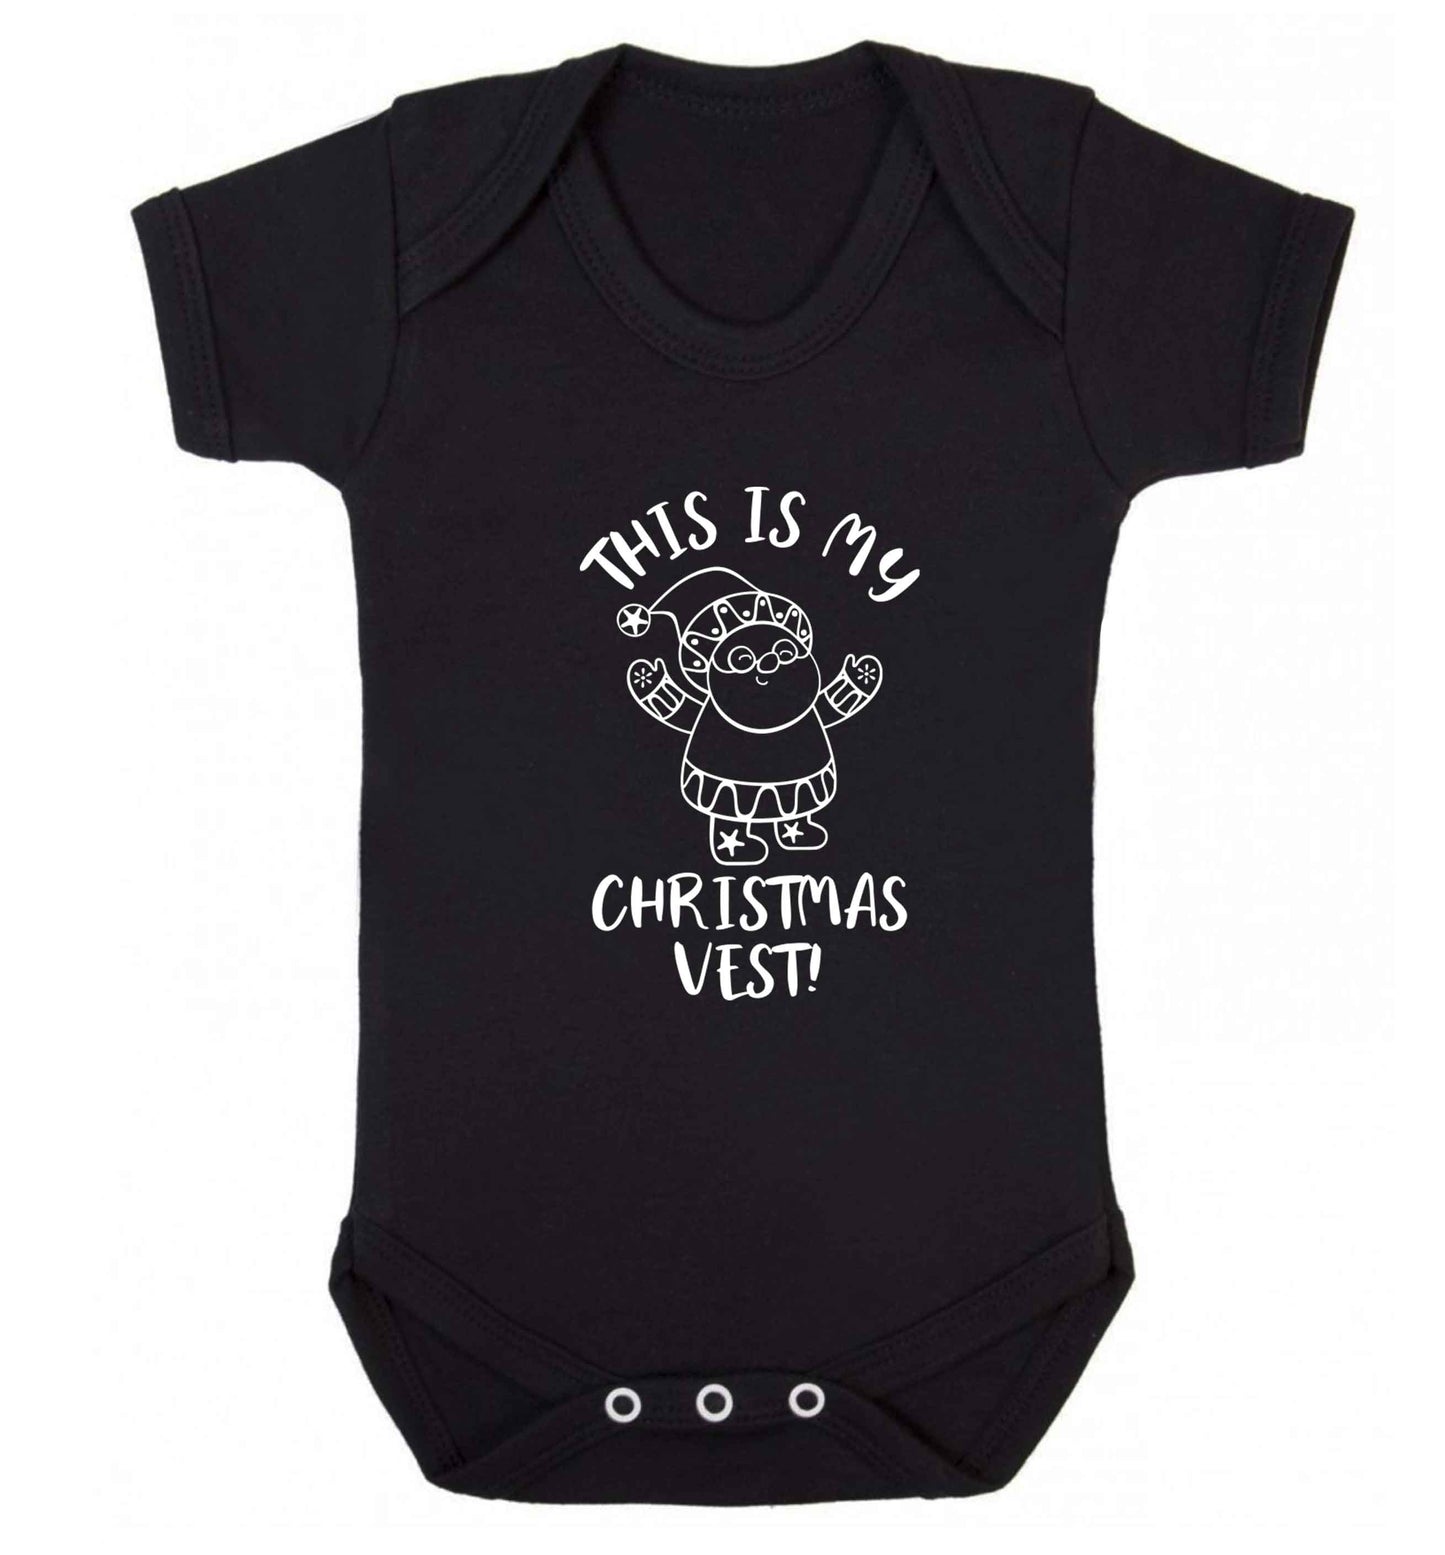 This is my Christmas vest Baby Vest black 18-24 months